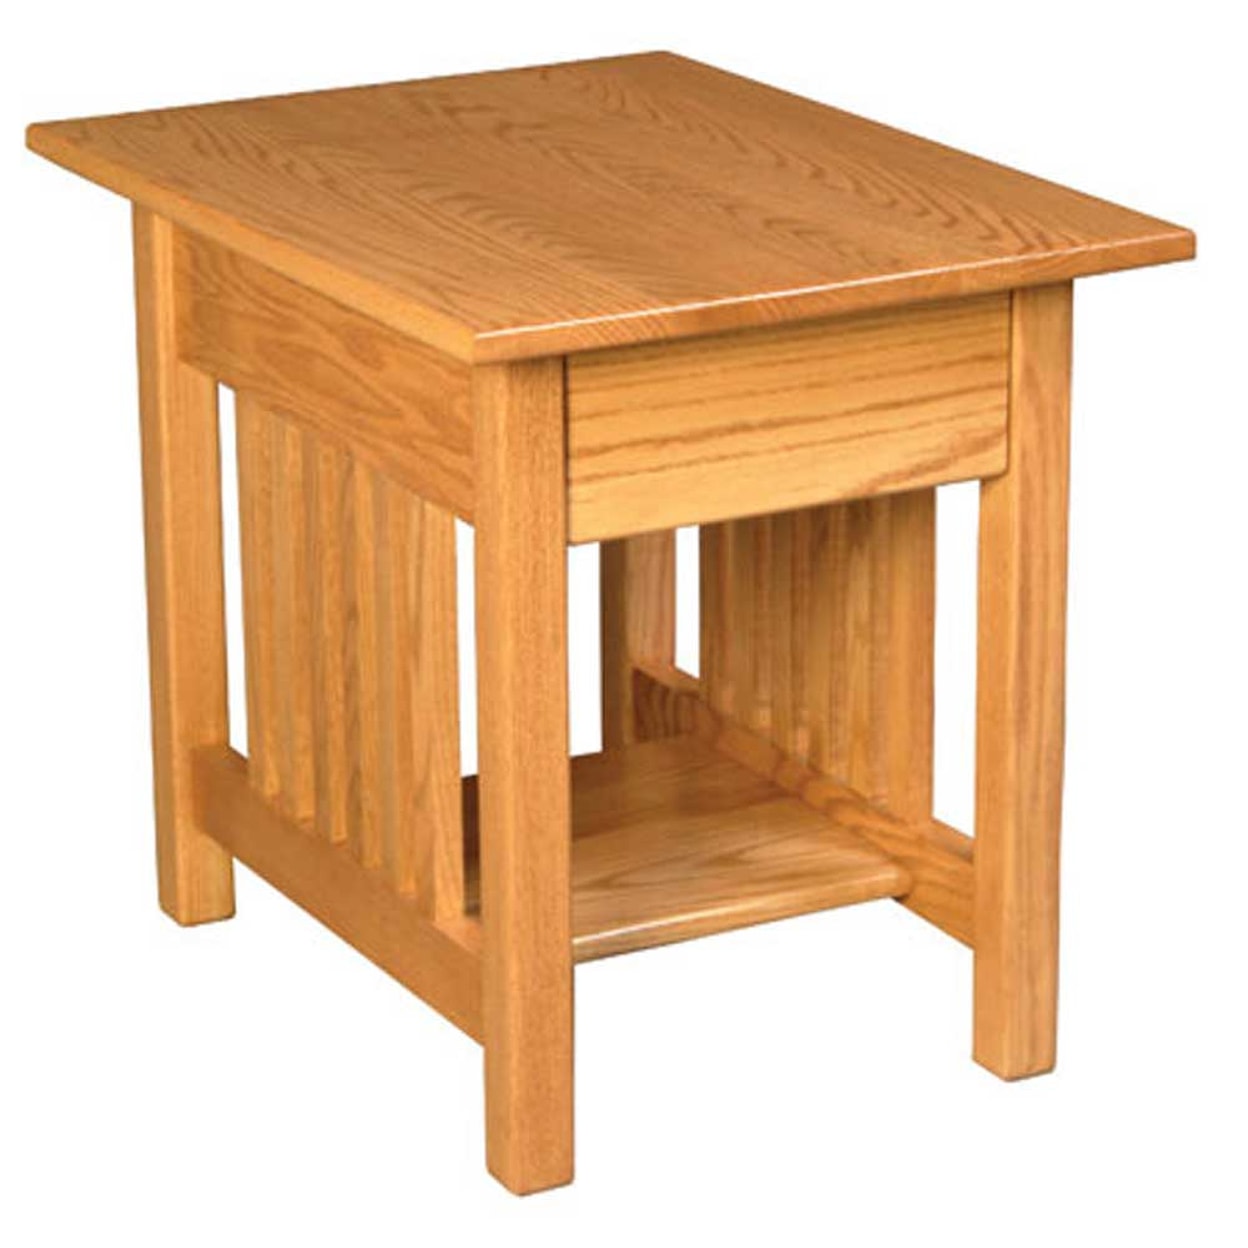 Simply Amish Mission Amish 1-Drawer End Table